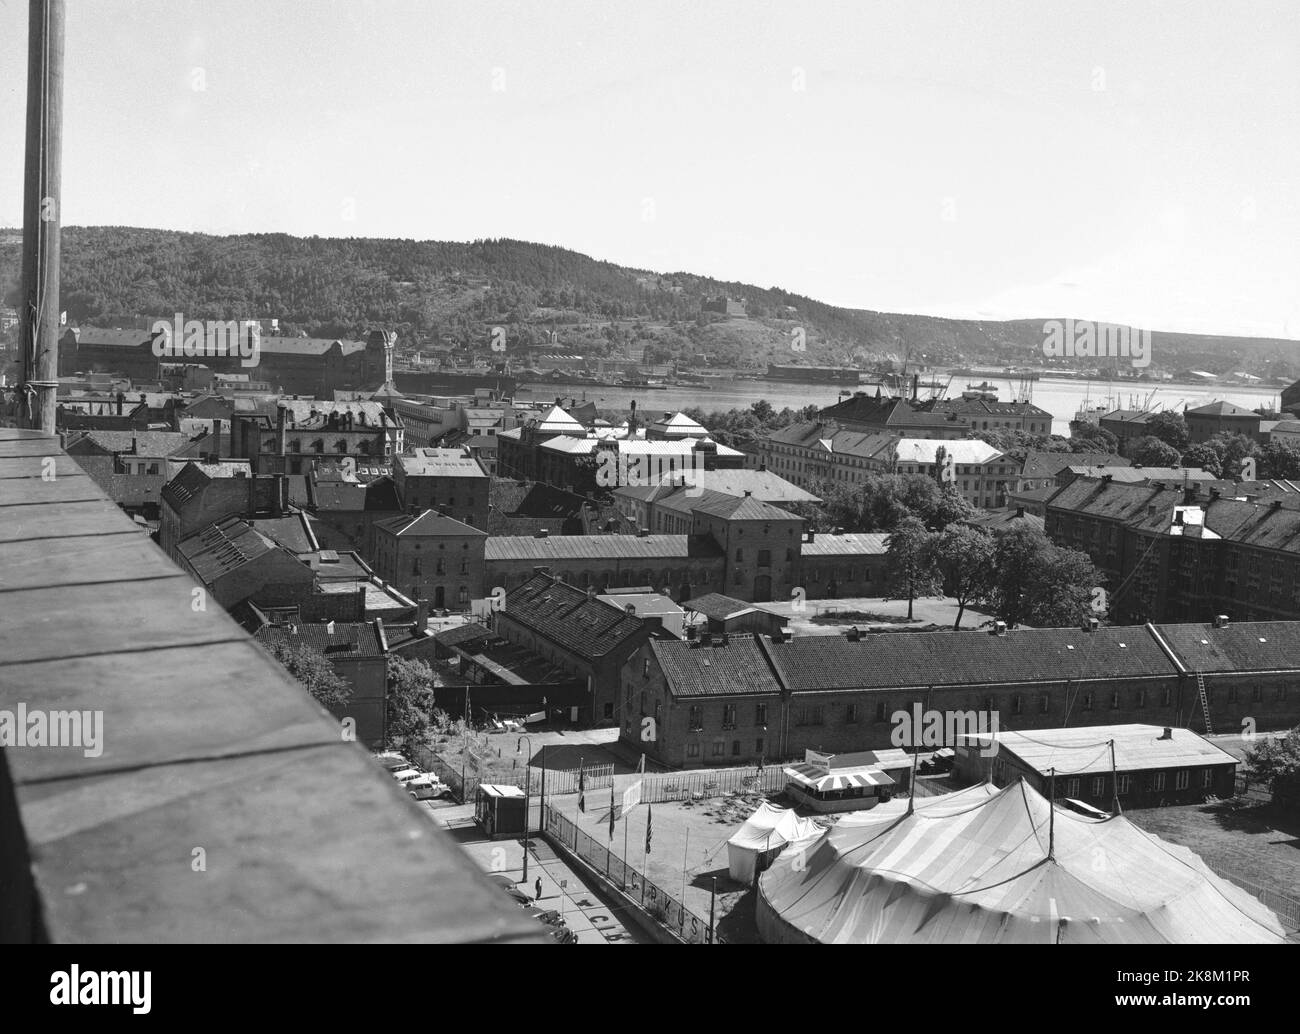 Oslo. 19490715. The motif was taken from the roof of the Norwegian Shipowners' Association. Contrasked. Here you can see Akershus fortress with the entire military area. In the foreground a circus tent and in the background the silo on the Vippetangen with Ekebergåsen and Bäckelaget. Photo: NTB Stock Photo